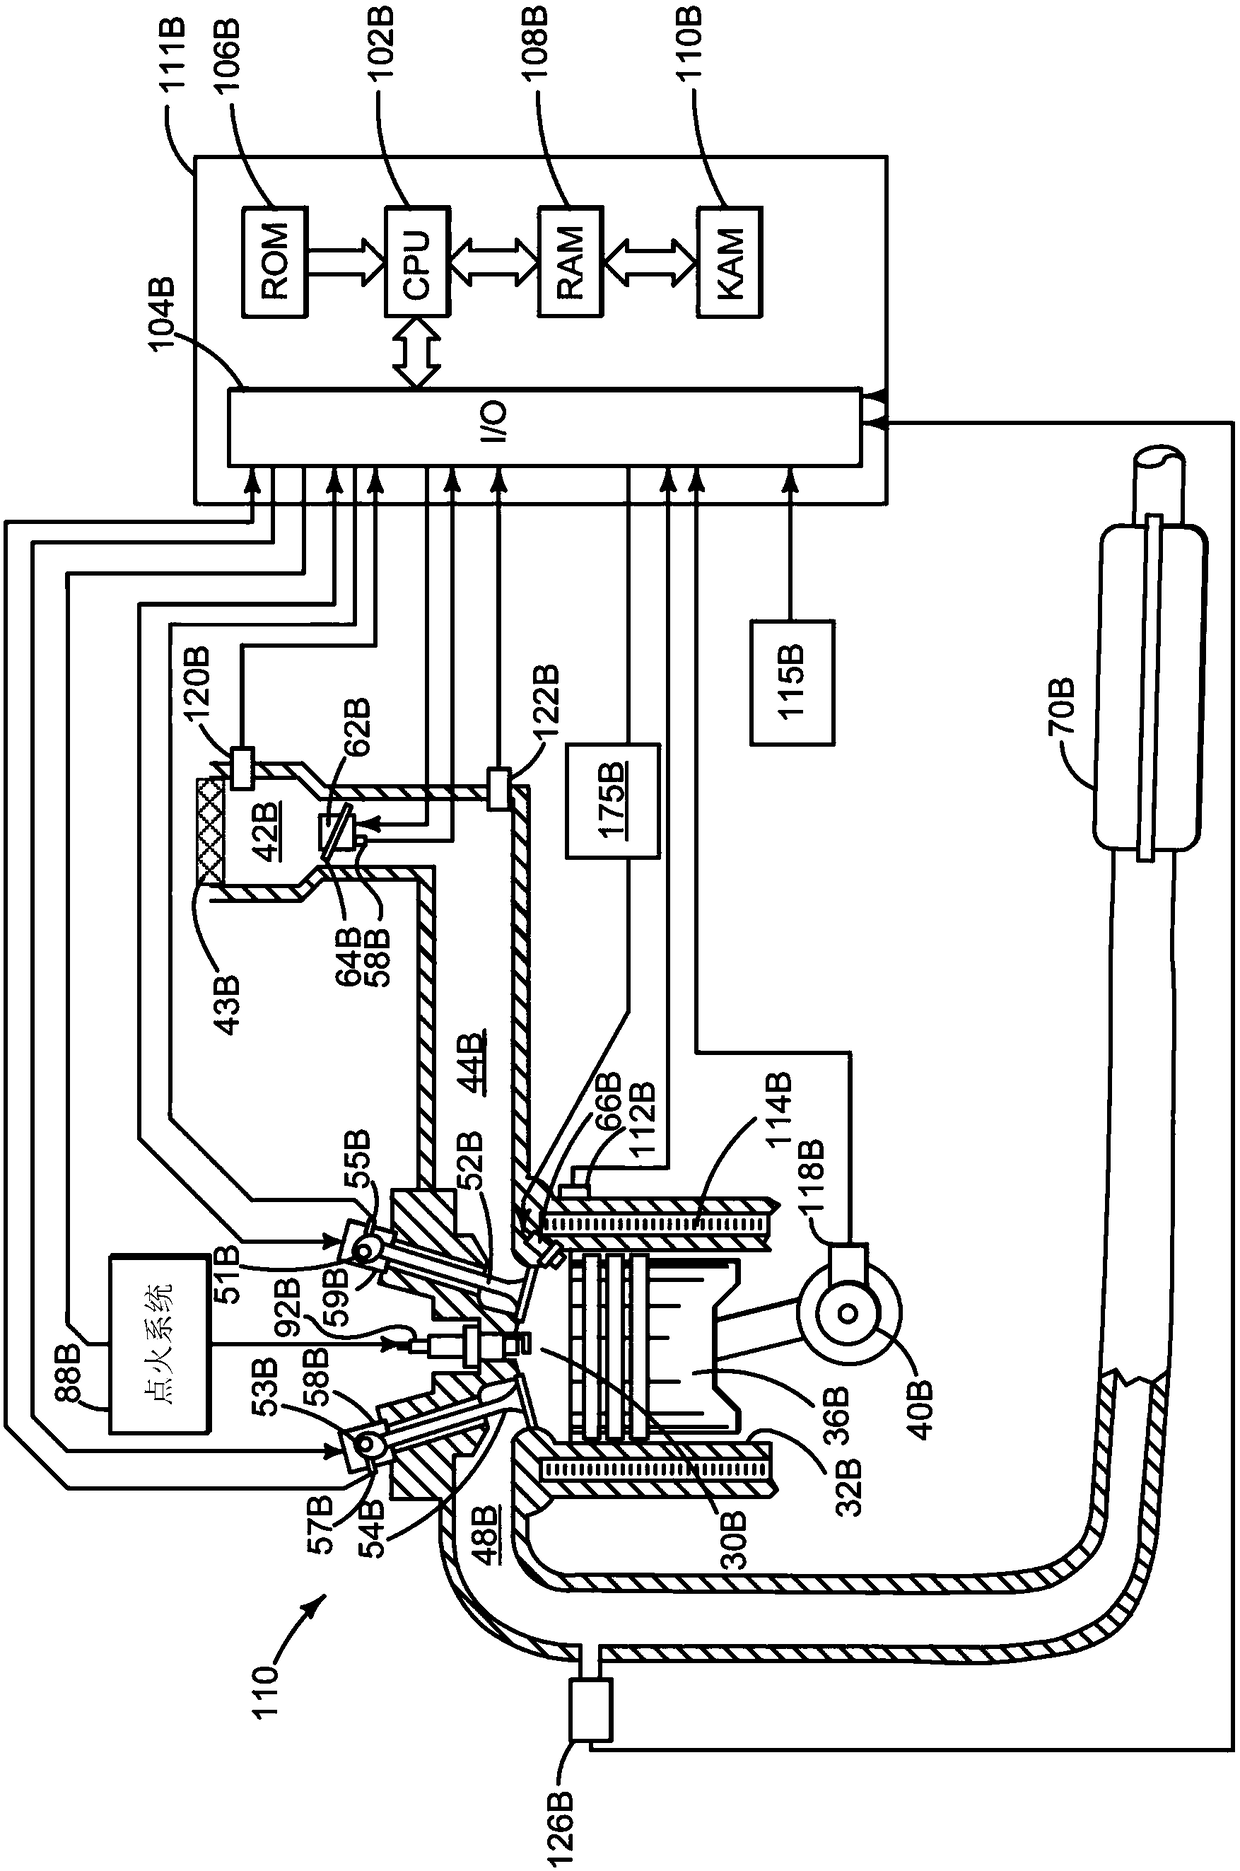 Systems and methods for meeting wheel torque demand in hybrid vehicle